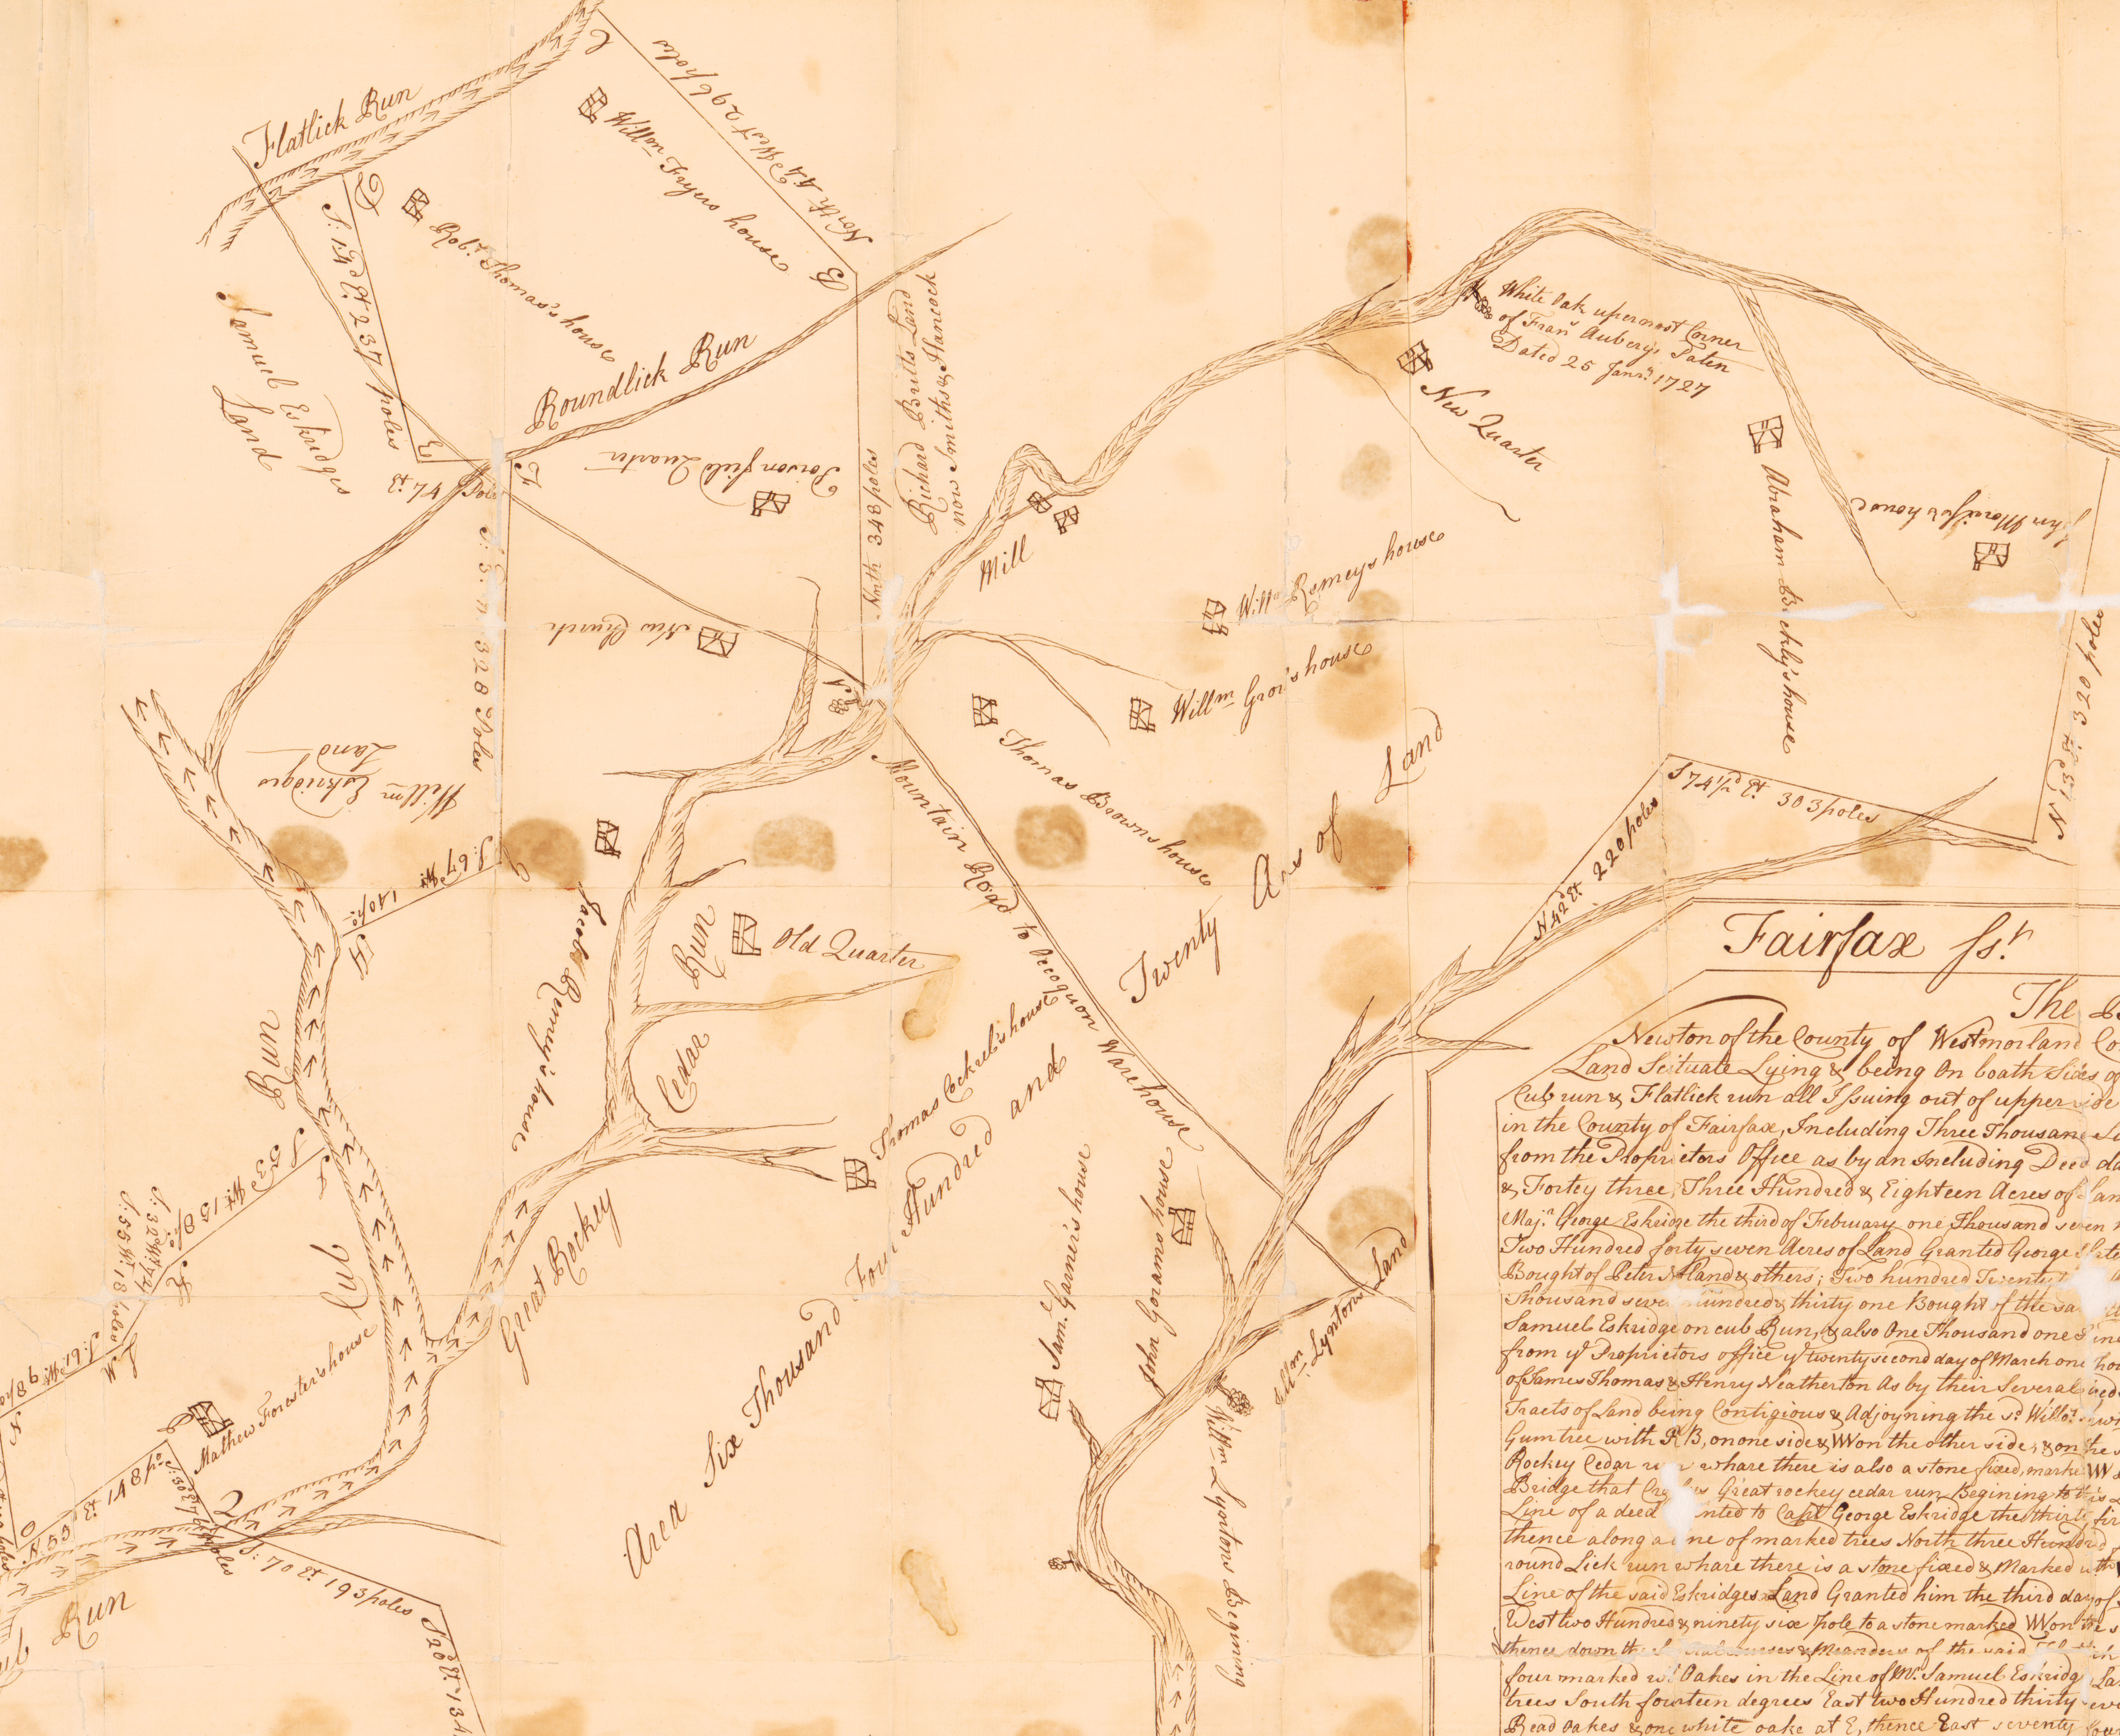 1748 survey of Willoughby Newton land in Centreville area. The Mountain Road is today's old Braddock Road.